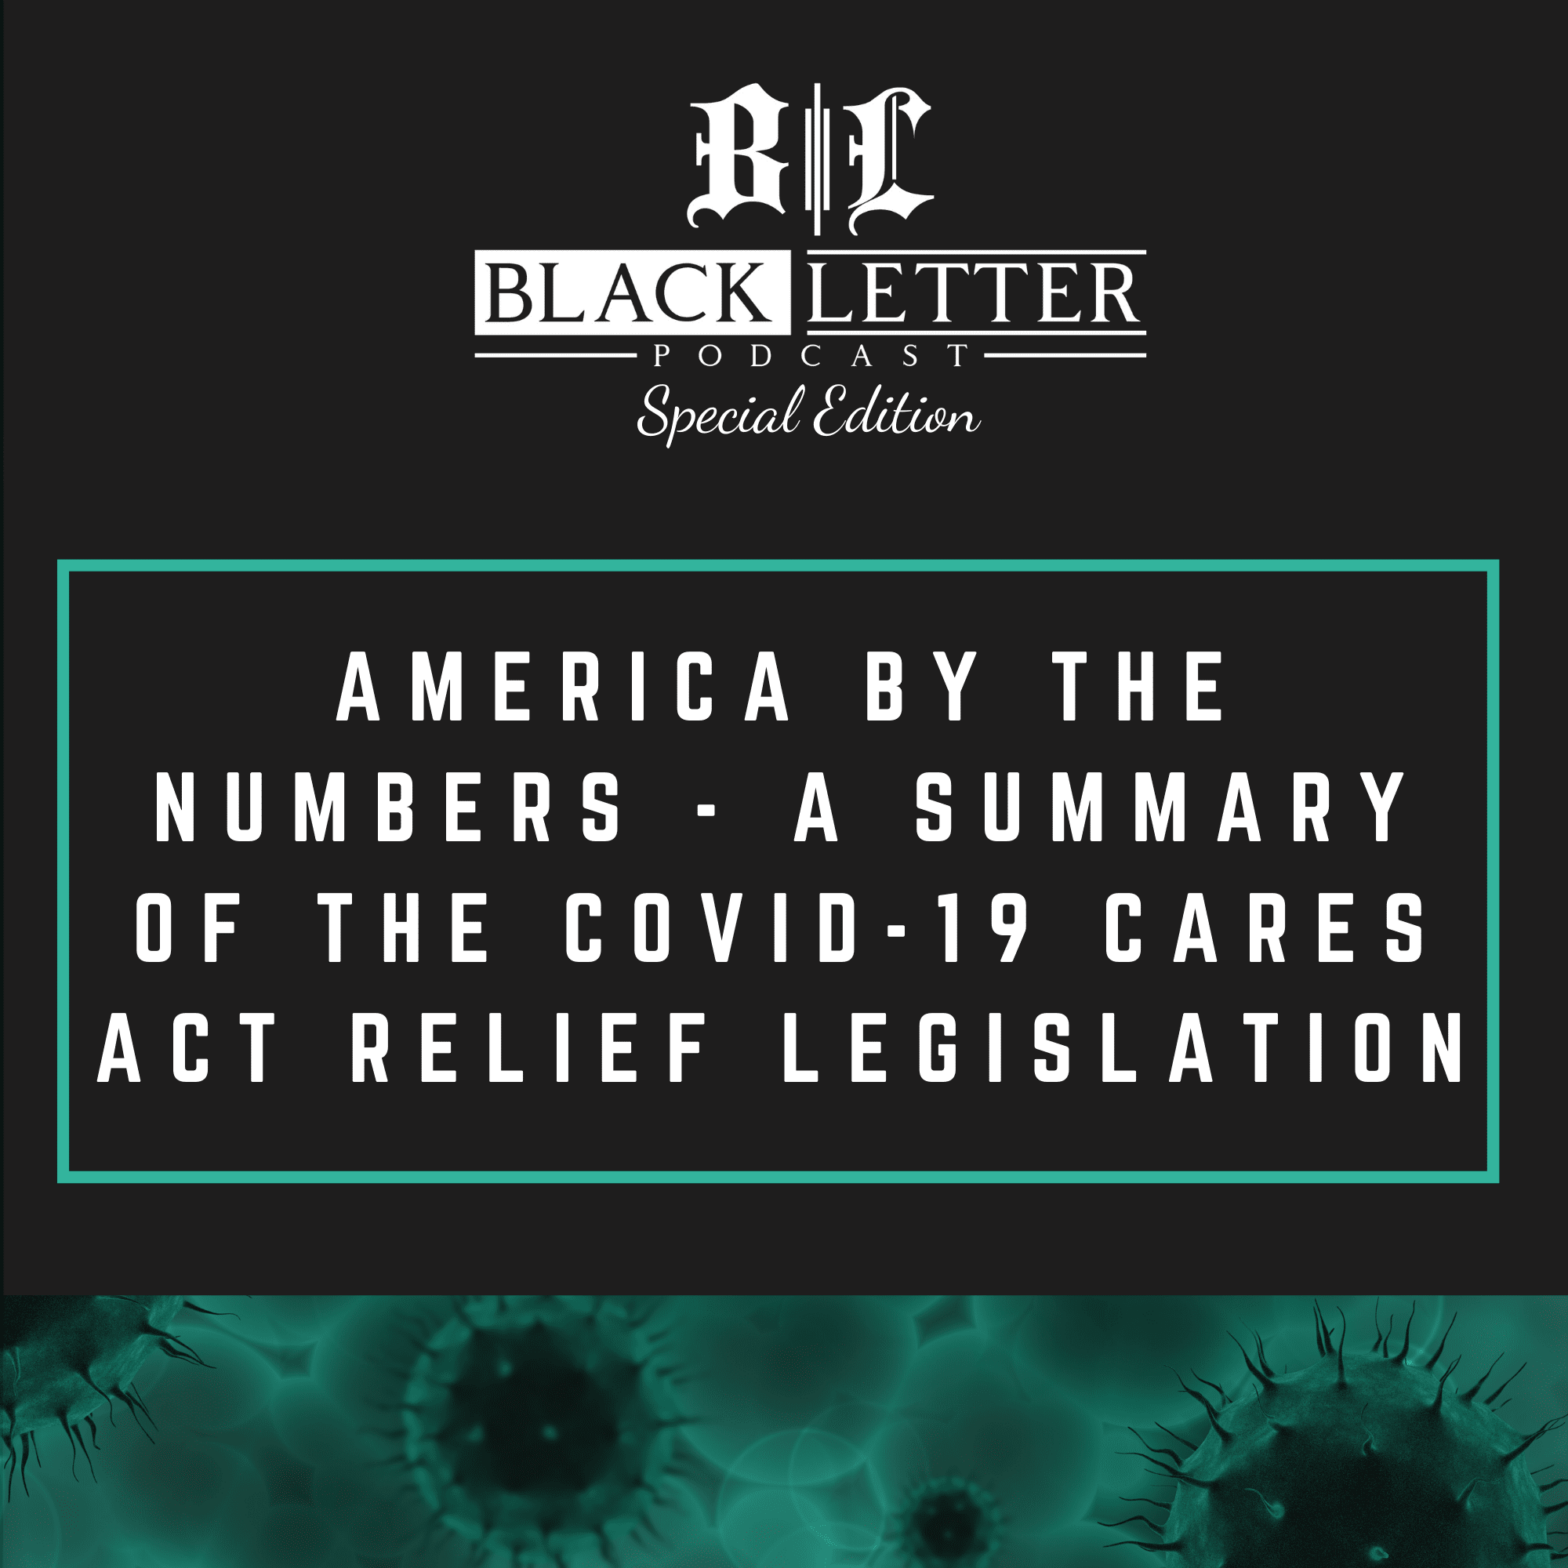 America By The Numbers - A Summary of the COVID-19 Cares Act Relief Legislation